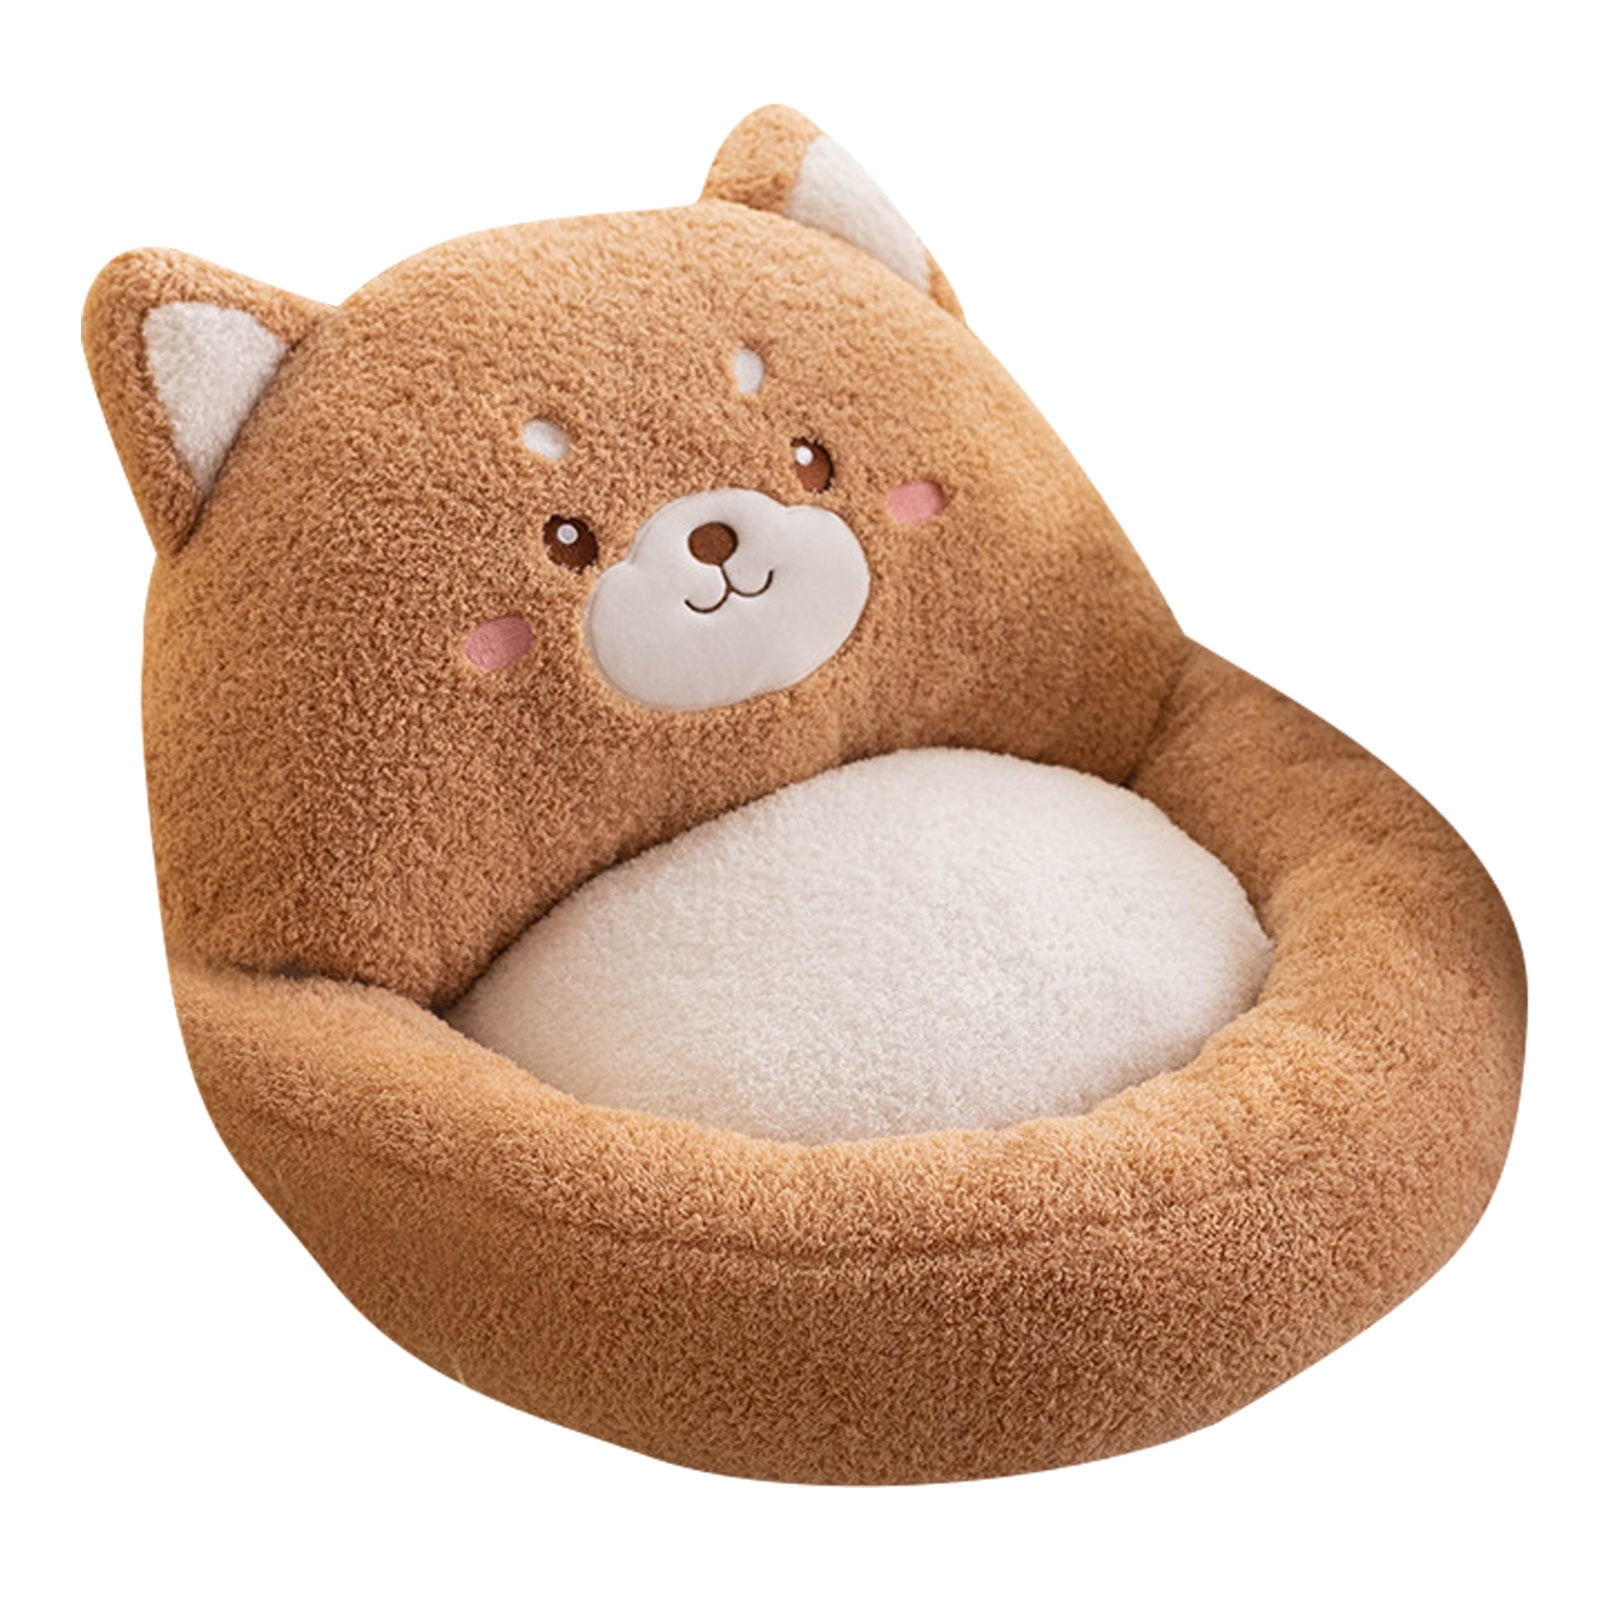 Cute Gaming Chair Cushion Kawaii Indoor Seat Cushions for Office Chair Comfy Plush Pillows for with Non Slip Backing for Khaki, Size: One size, Brown